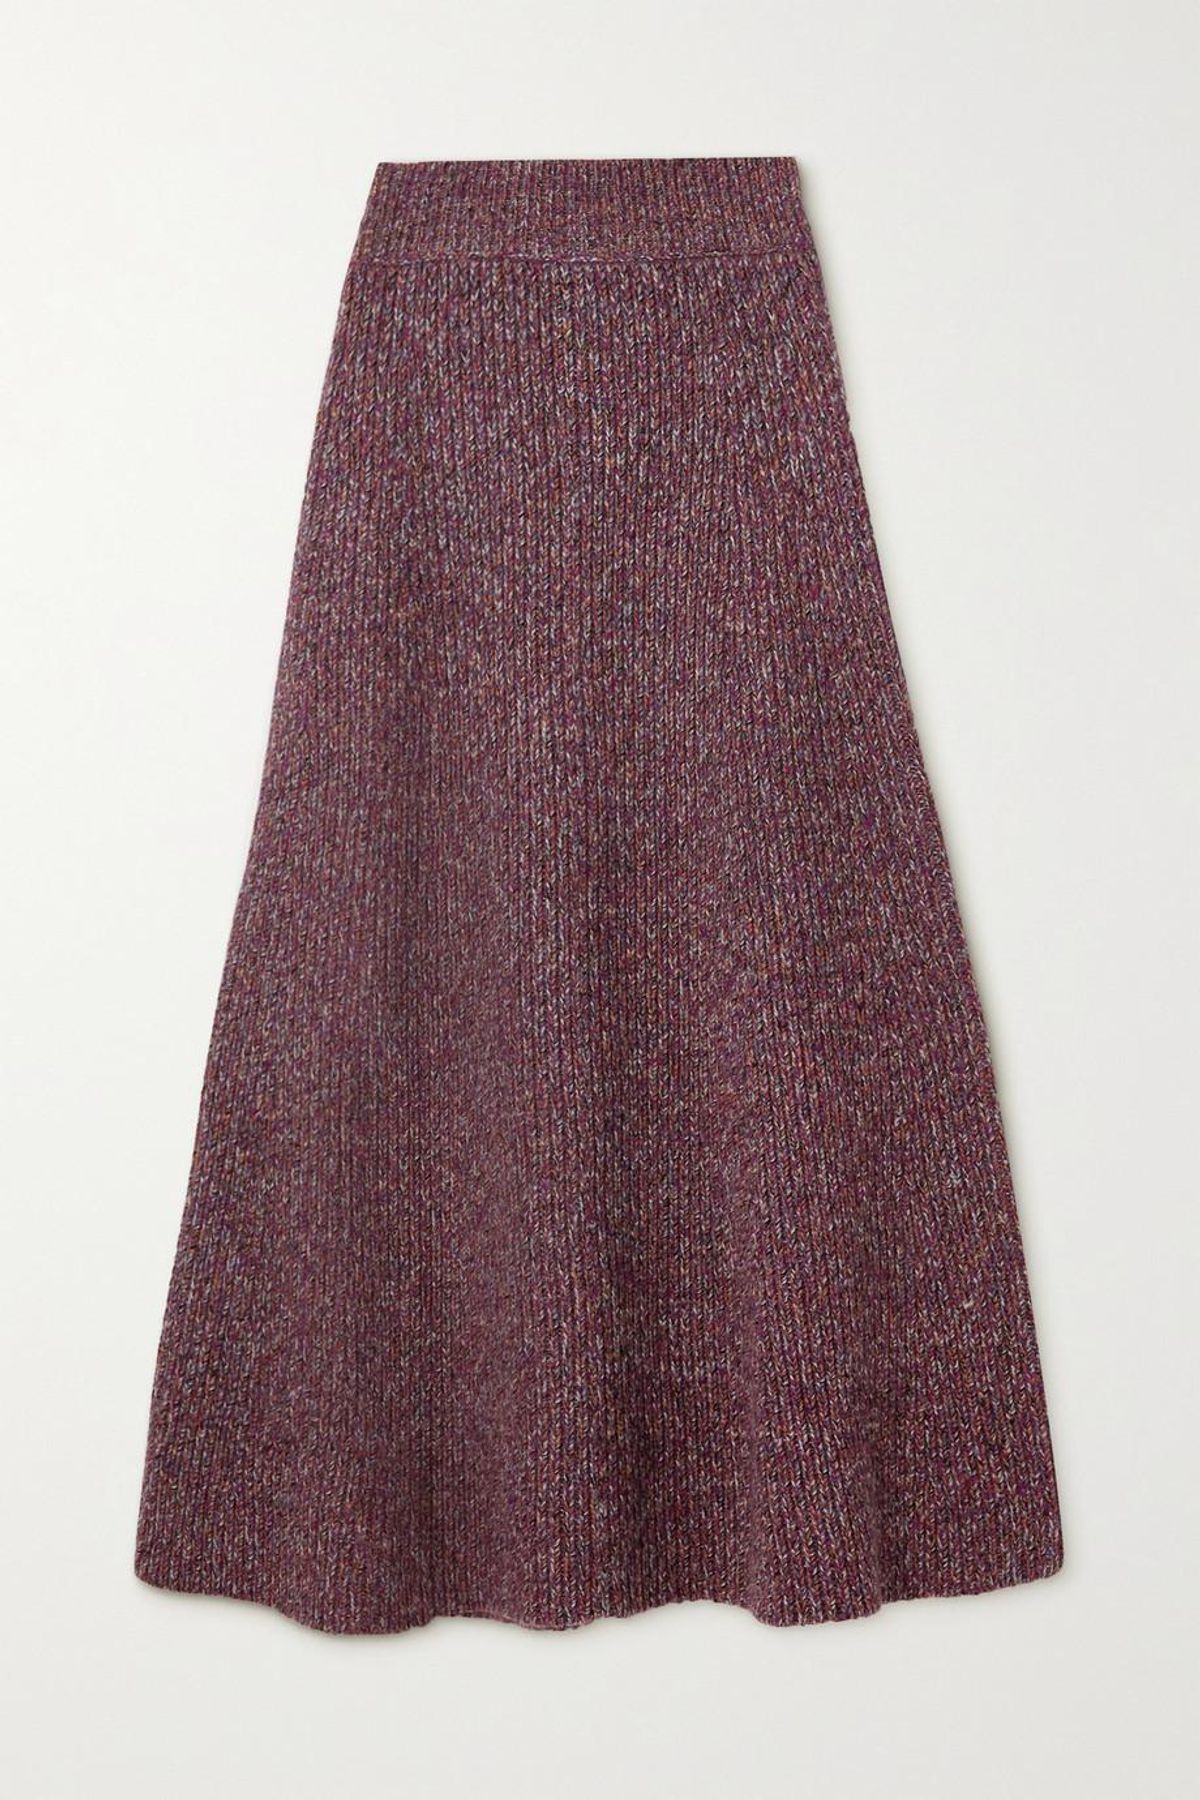 chloe ribbed cashmere and wool blend midi skirt